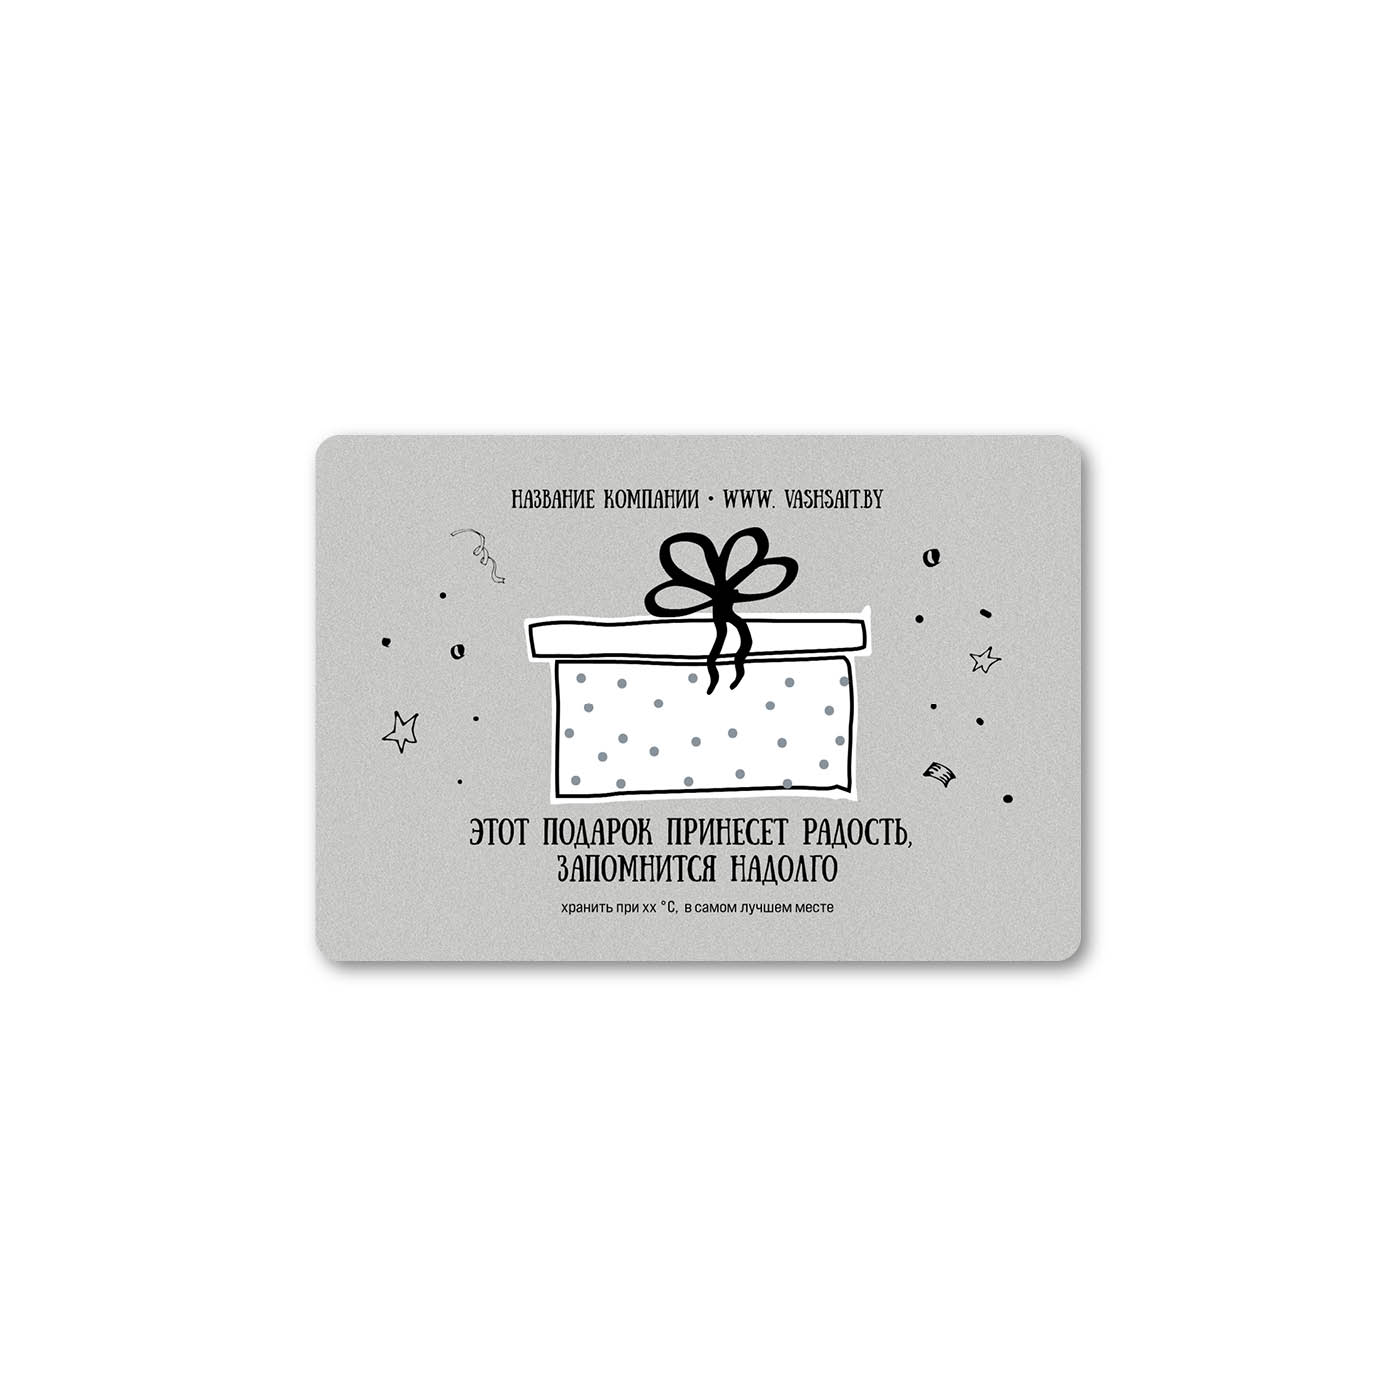 Stickers, rectangular labels A gift on a gray background